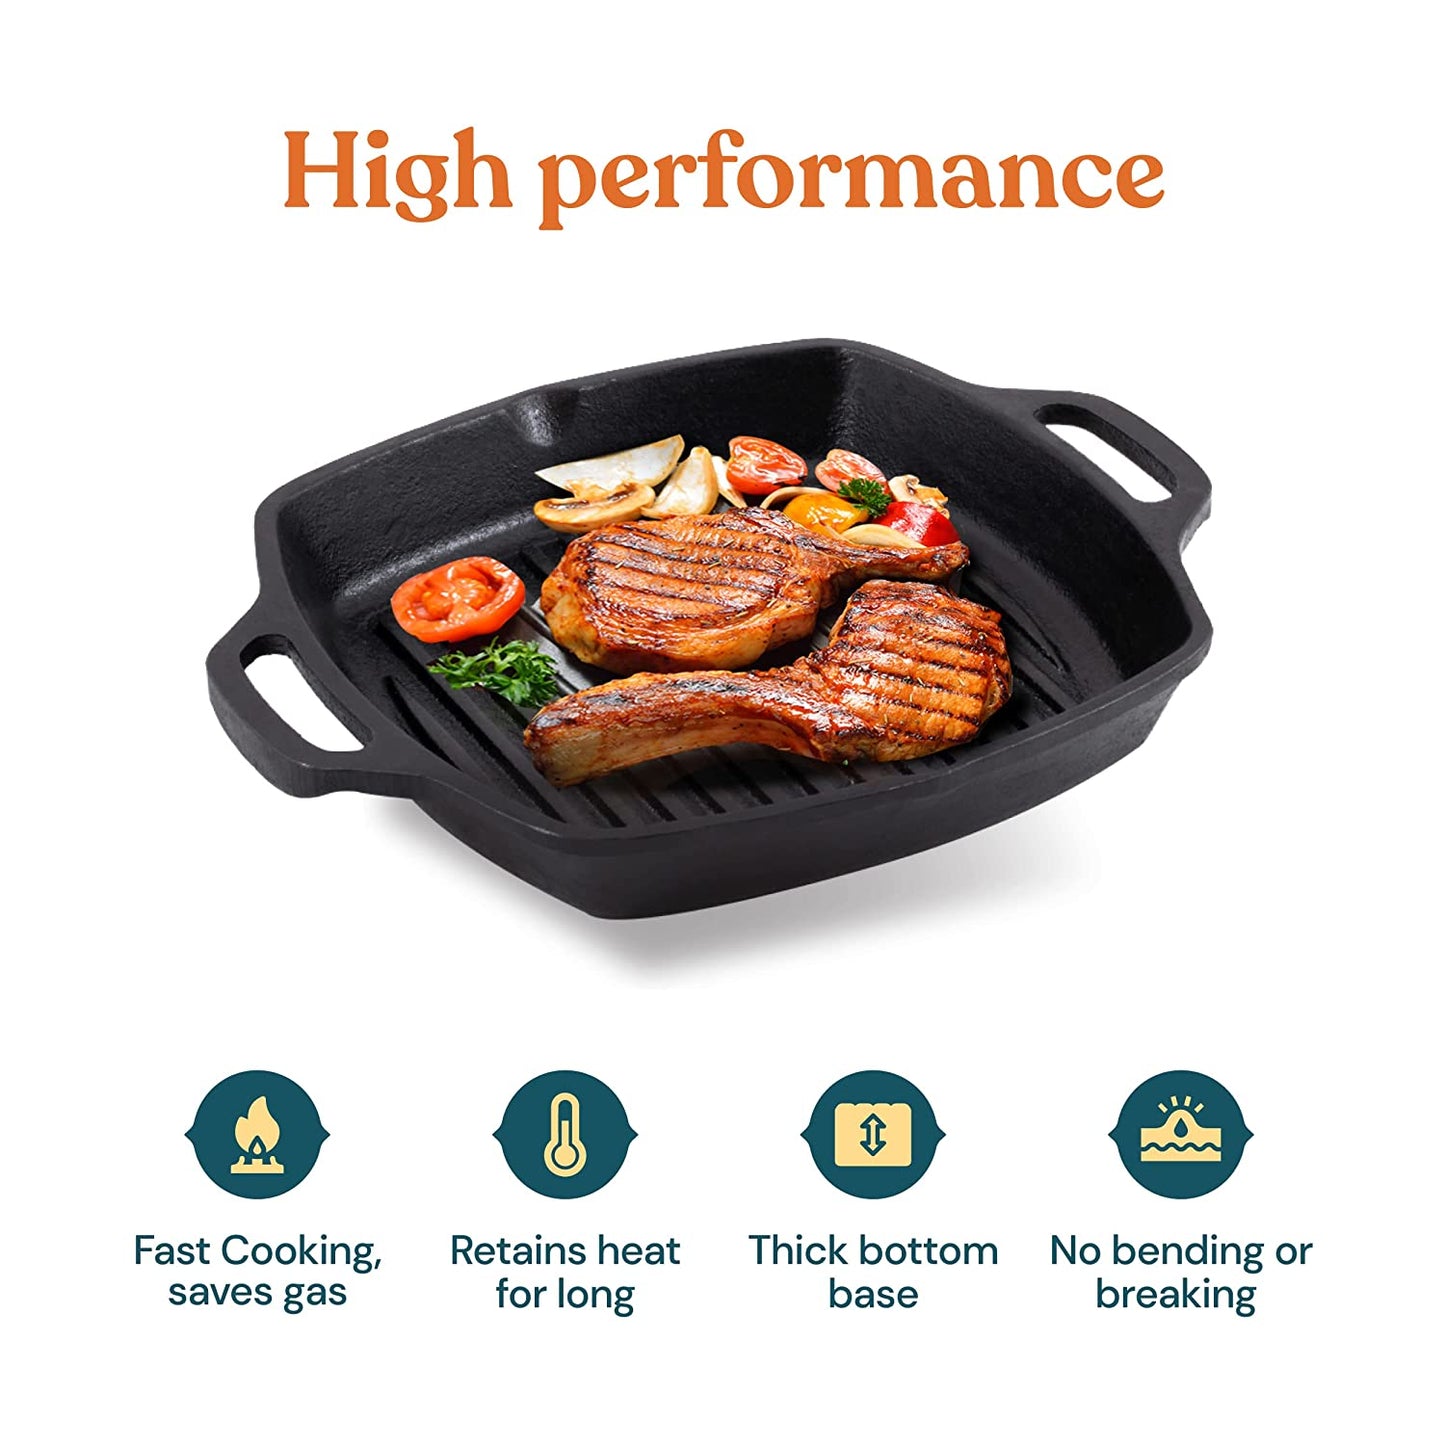 Cast Iron Cookware Tandoor Grill Pan / Non-Stick Barbeque / Sandwich Maker / Induction & Gas Compatible | Fish Frying Pan / Non-Toxic - (10in, Looped Handle)